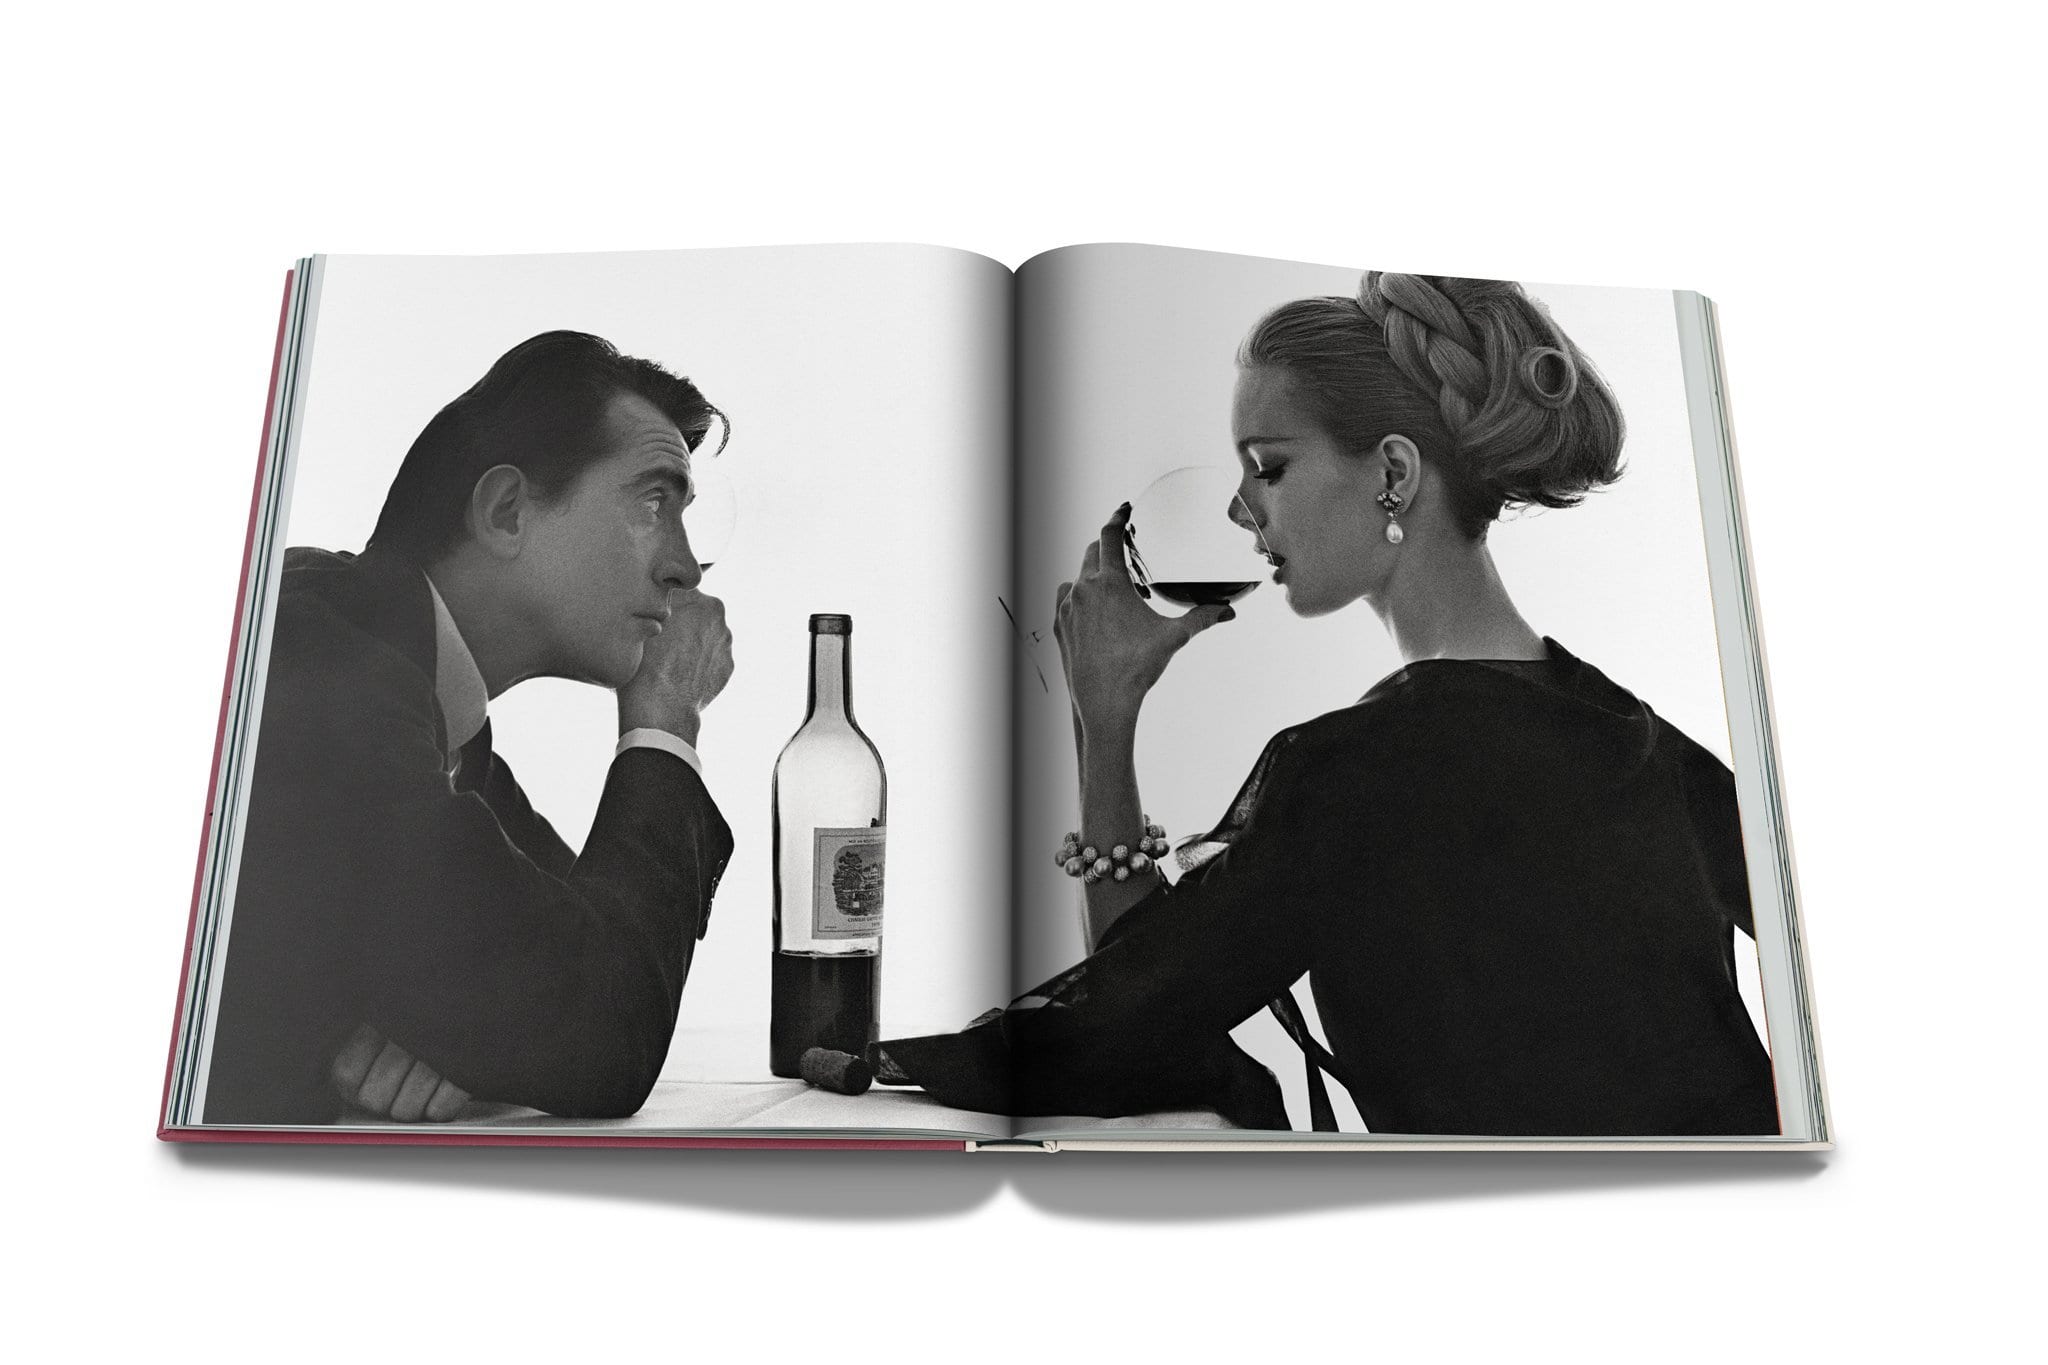 Assouline The Impossible Collection Of Wine